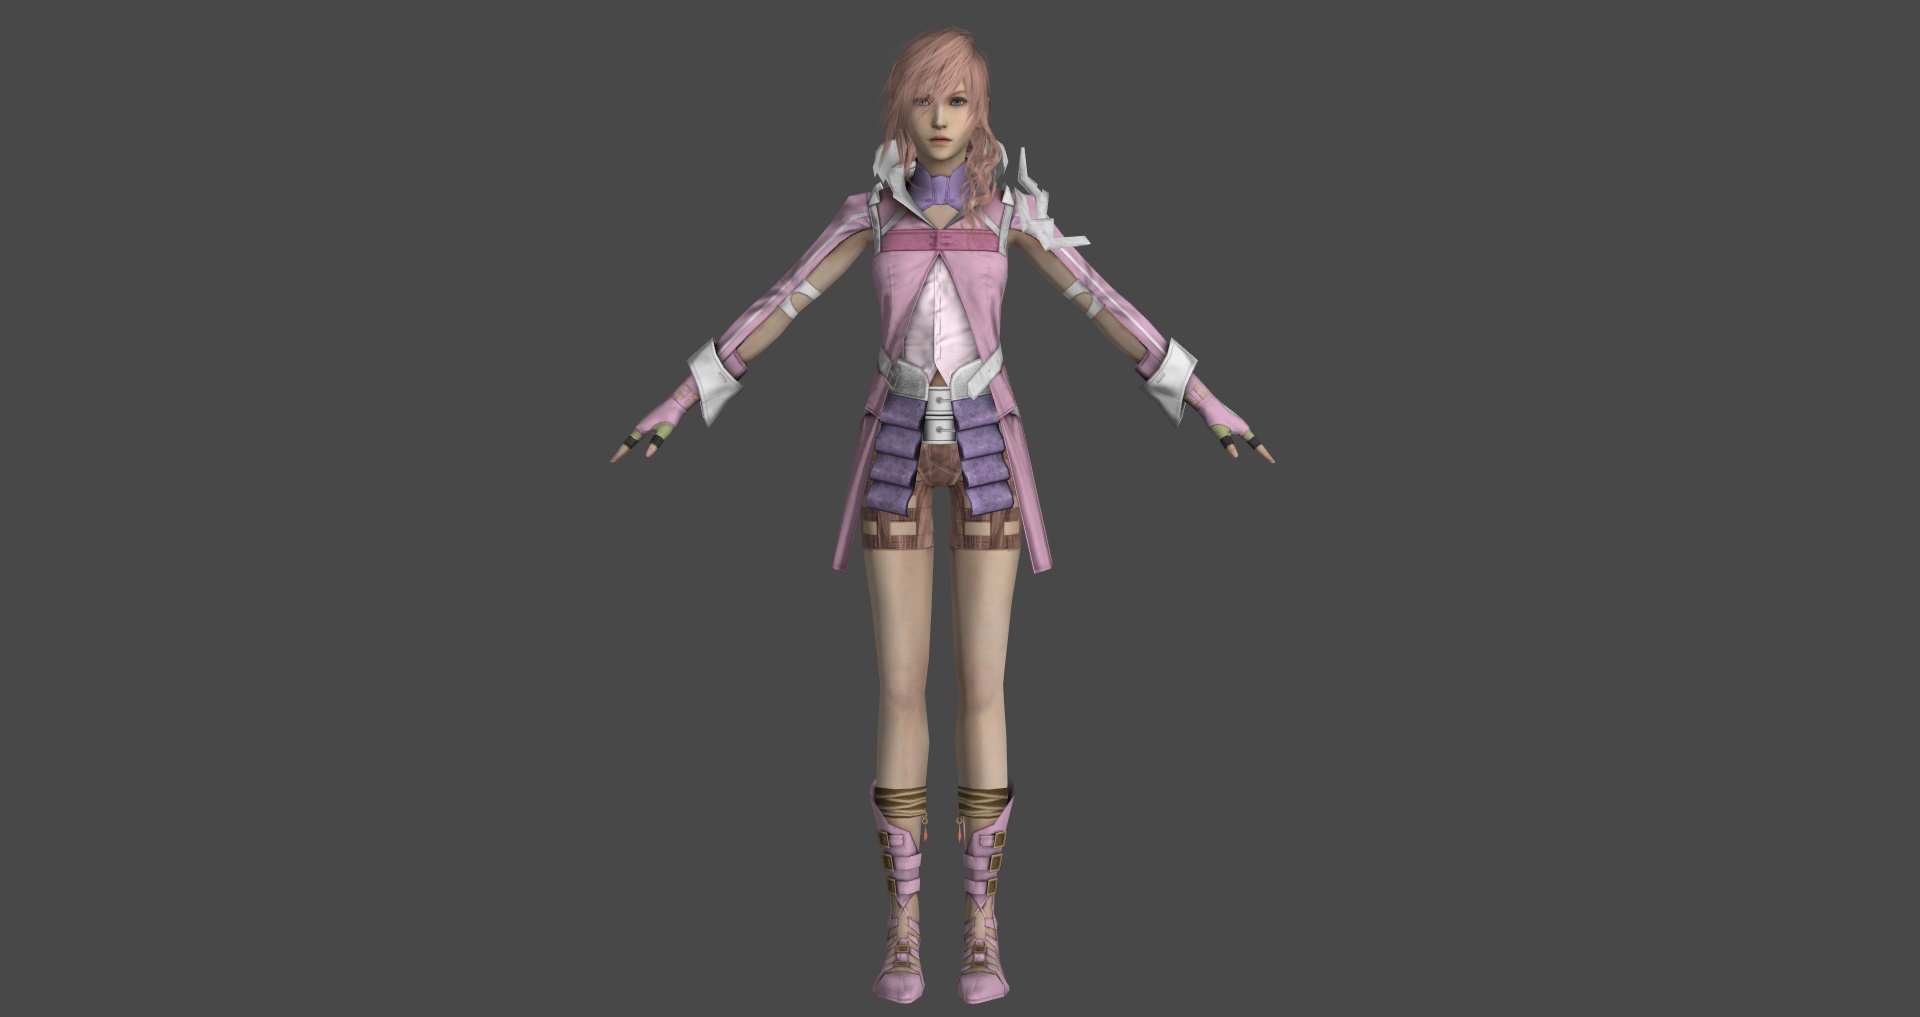 Why does Lightning look so different in FFXIII Lightning Returns